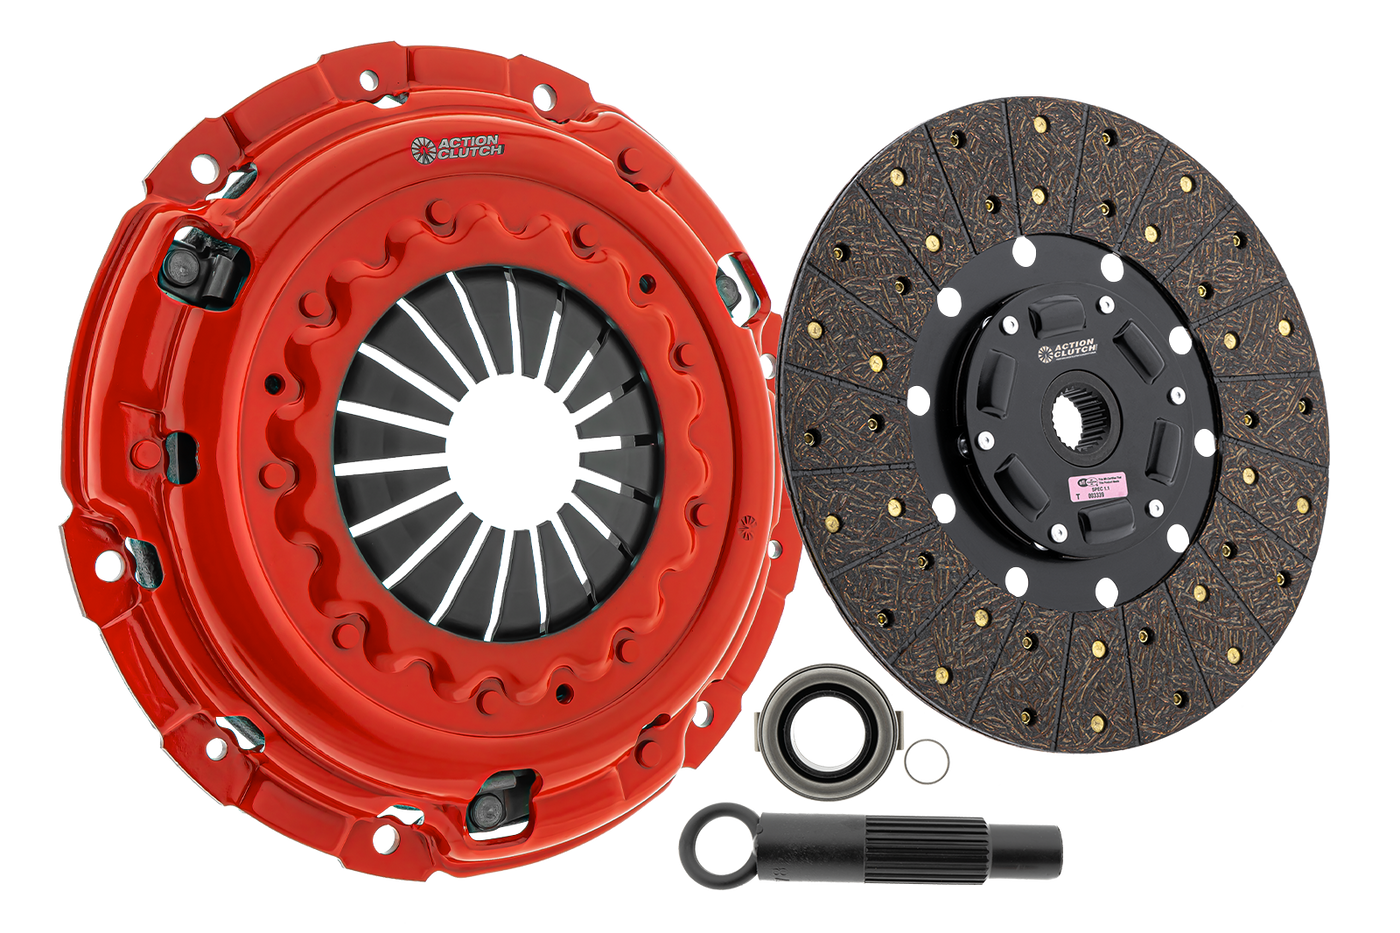 Stage 1 Clutch Kit (1OS) for Mitsubishi Galant 1994-1998 2.4L DOHC (4G64)